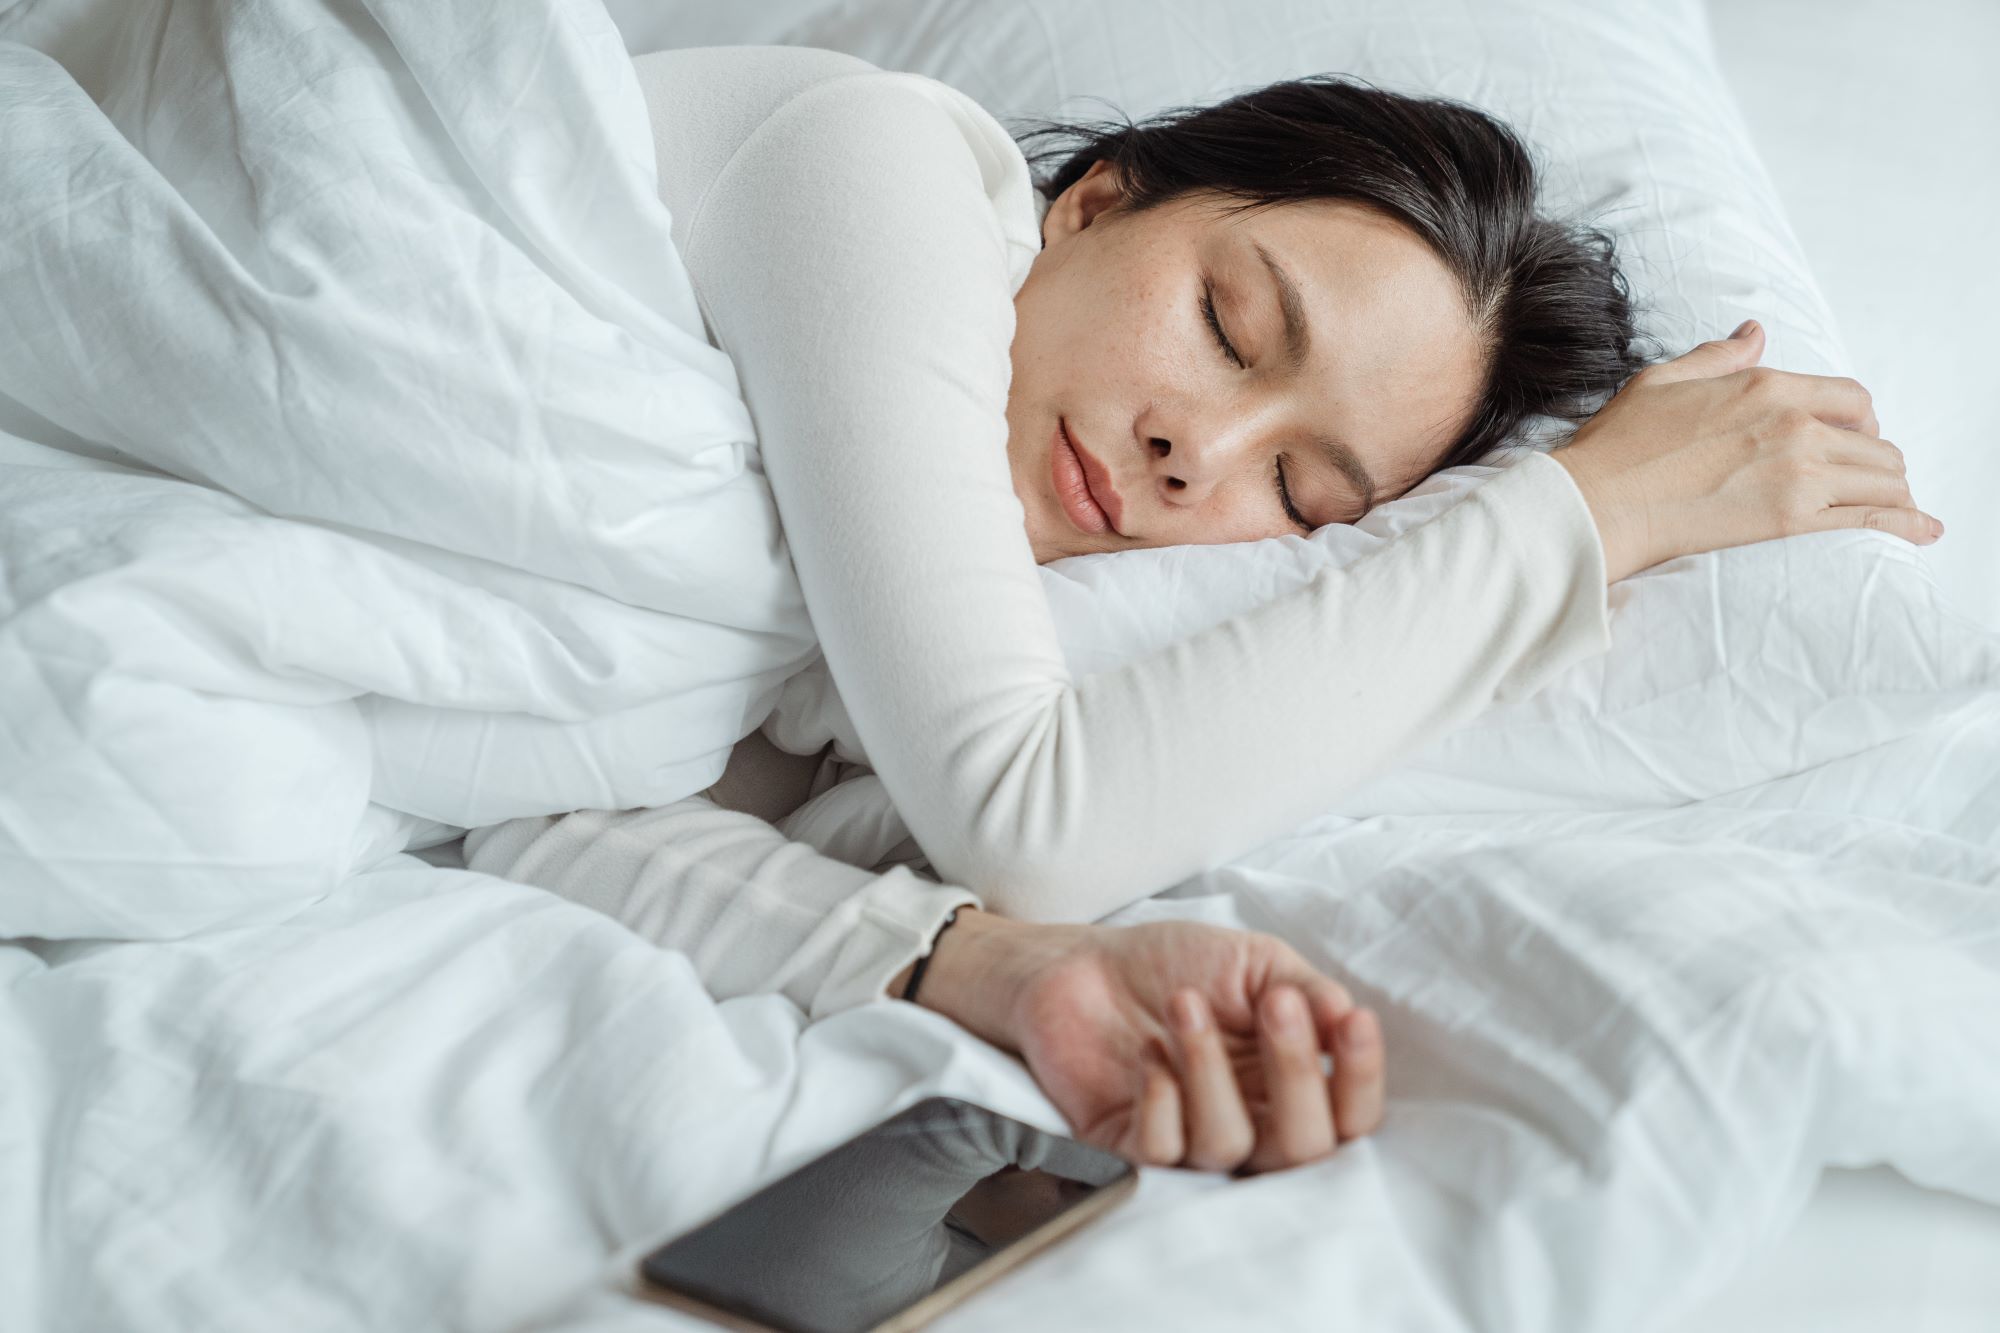 4 Night Routines for a Good Night’s Sleep